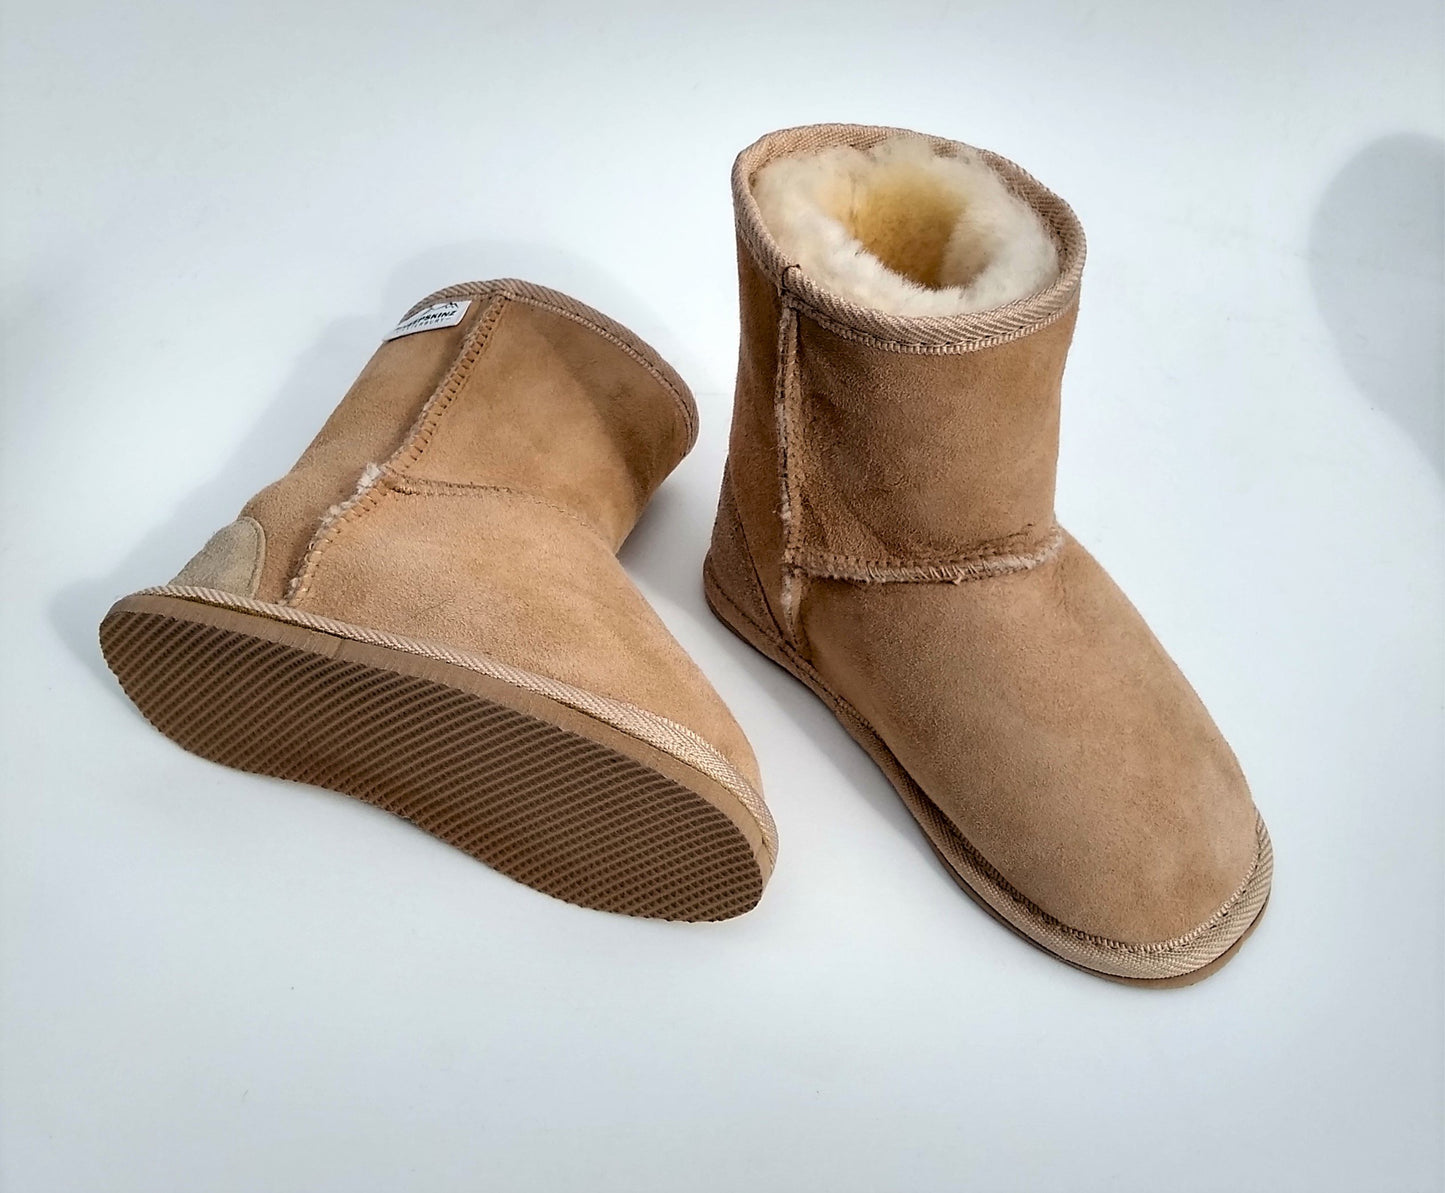 KELLY CHILD'S UGG - Woolshed Gallery